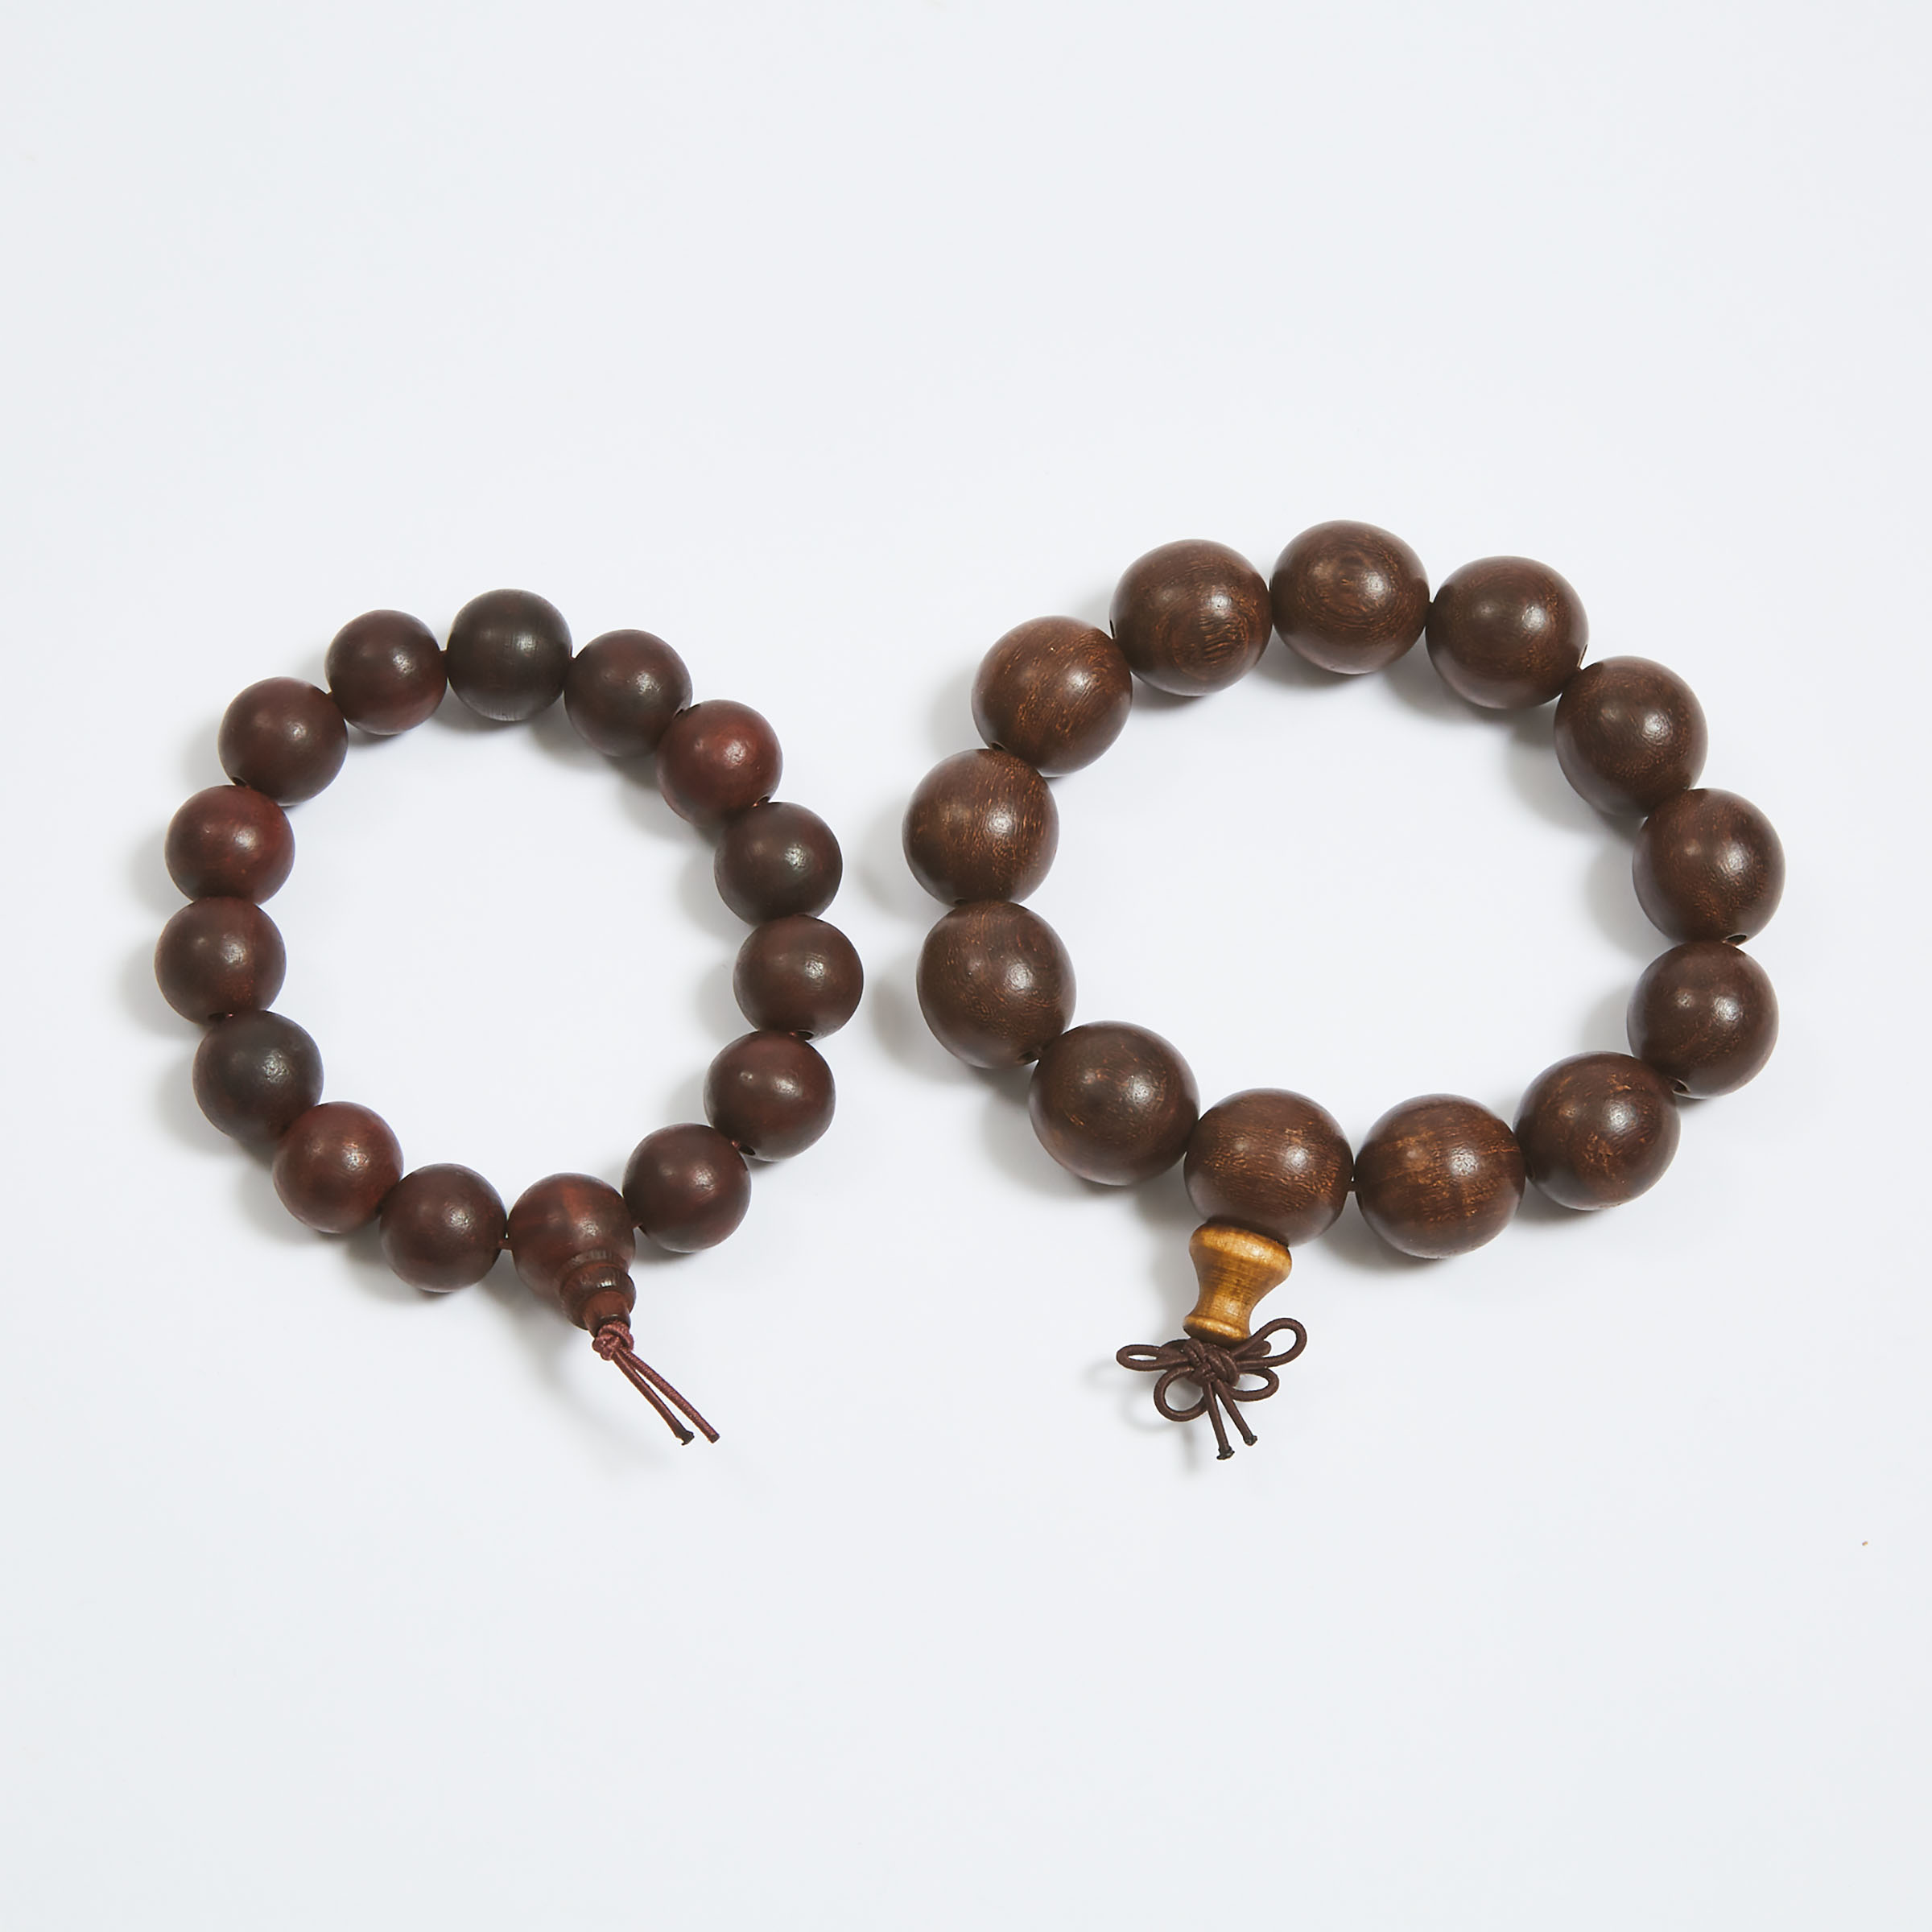 Two Strands of Hardwood Beaded Bracelets, Republican Period, Early to Mid 20th Century